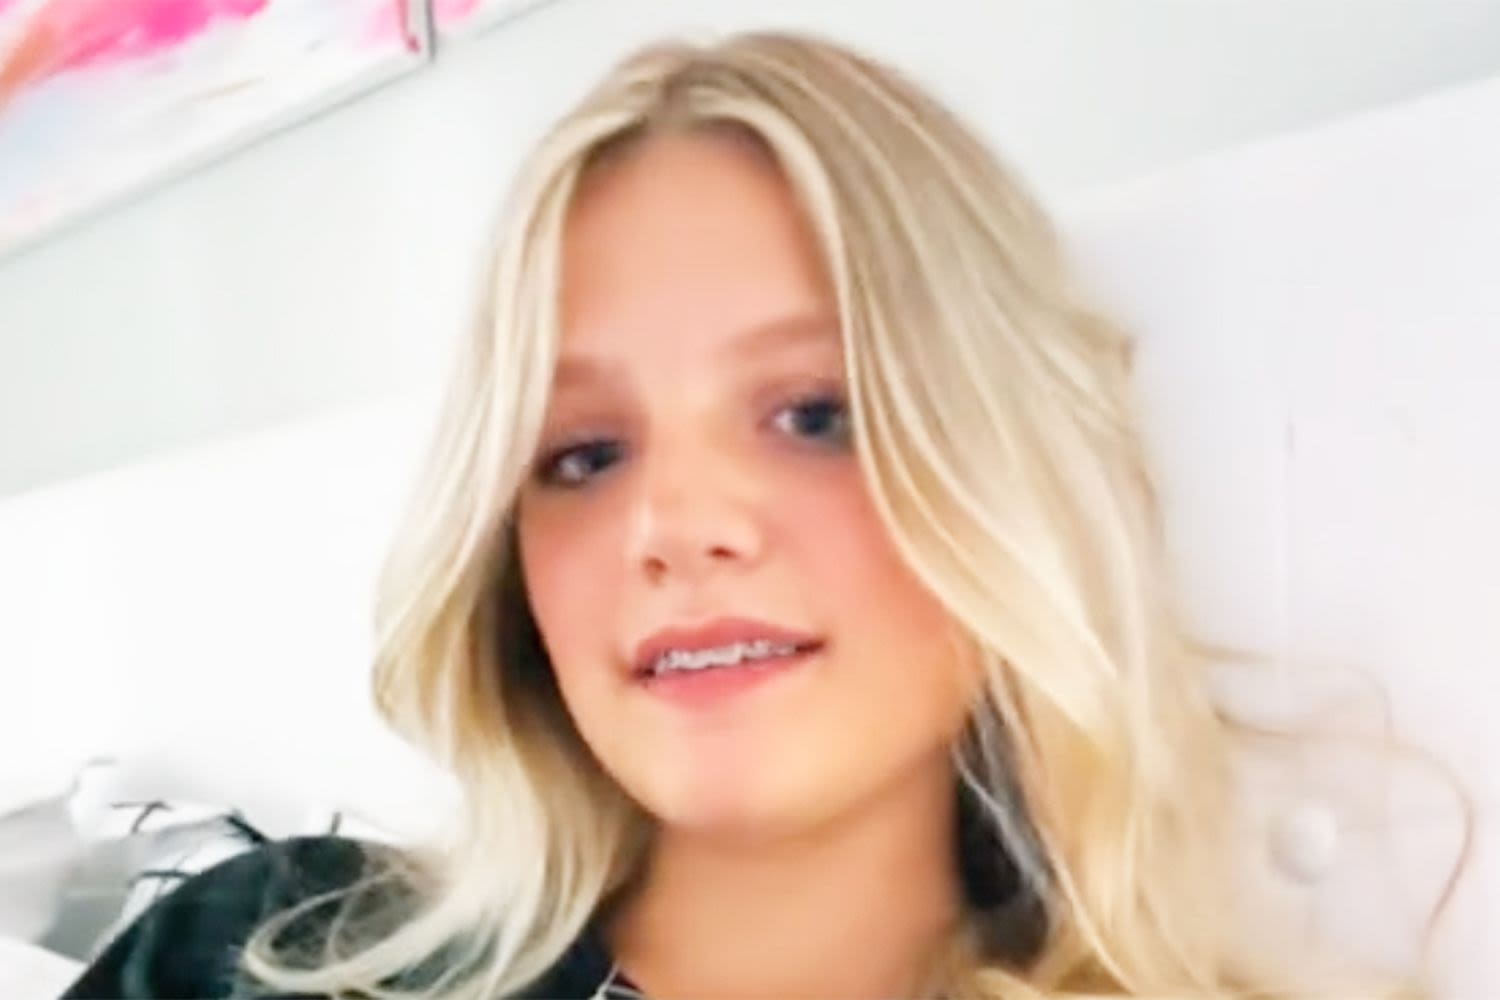 Everything to Know About Aubreigh Wyatt's Death and Her Mom's Fight to Tell Her Story on TikTok